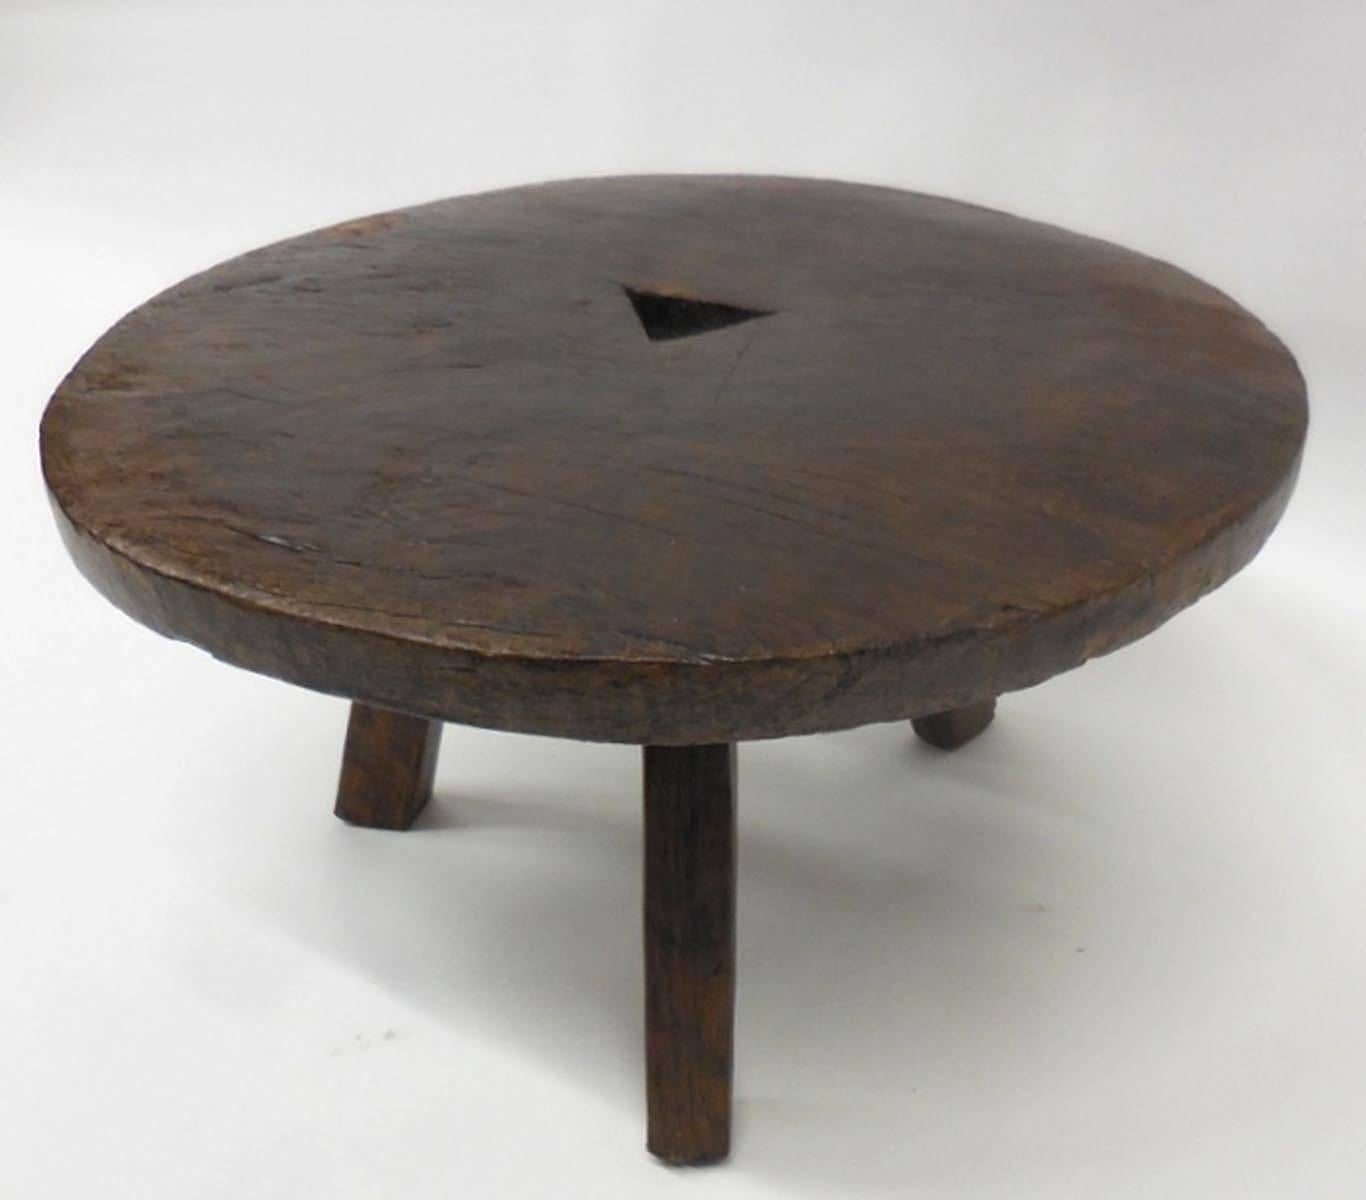 19th century wooden wheel, transformed onto a three legged stool/ side table. Triangular cut-out in the middle. Very sturdy and heavy. Great patina.